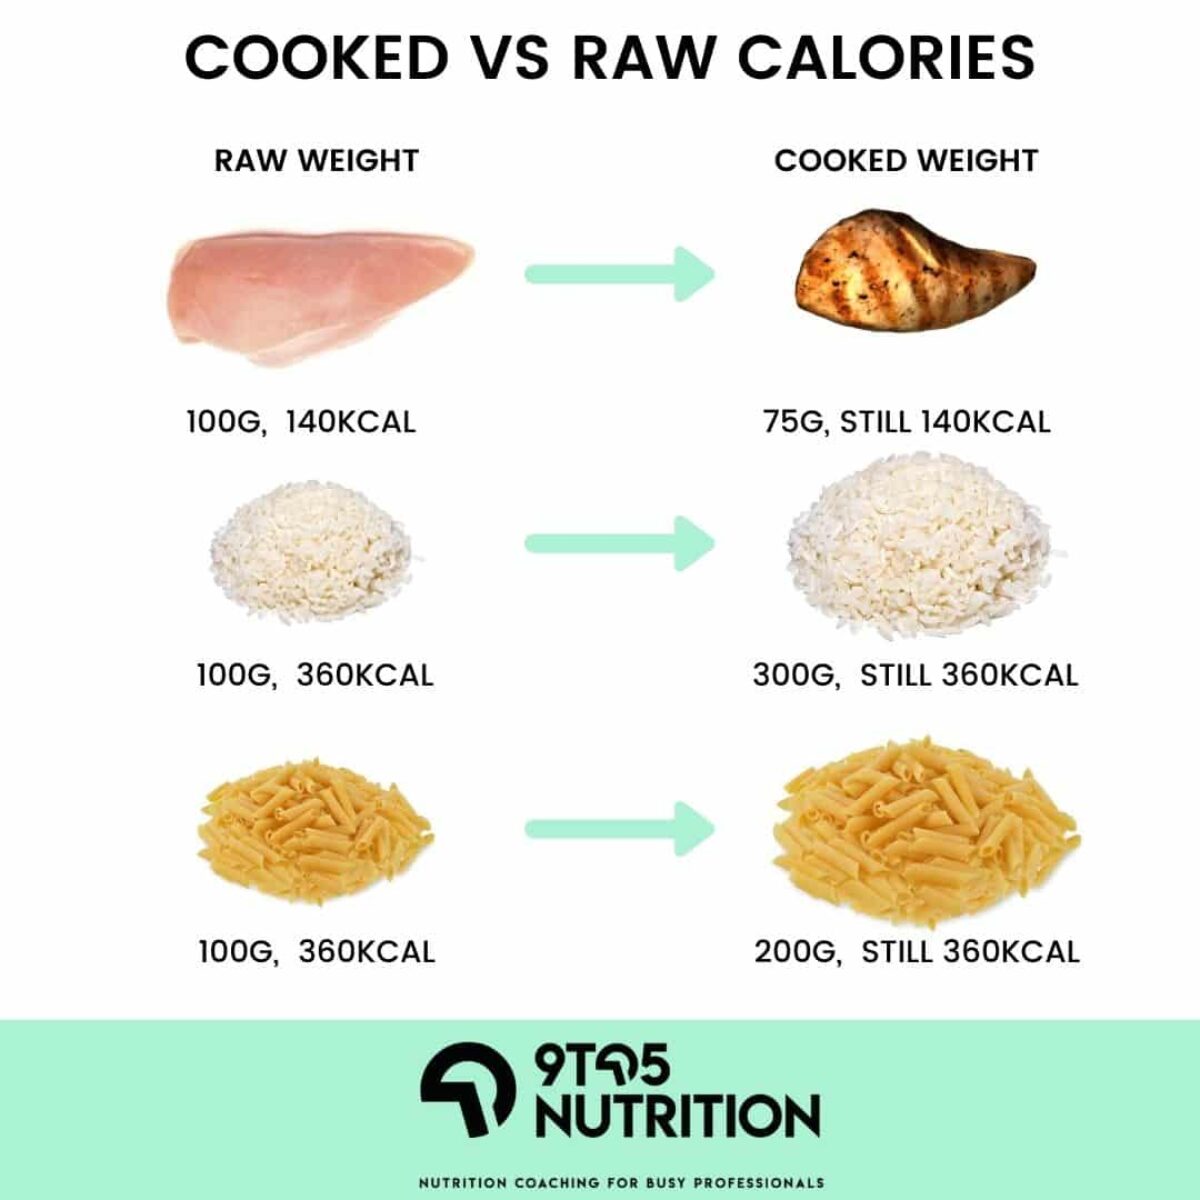 Should You Weigh and Track Calories Raw or Cooked? | 9 To 5 Nutrition